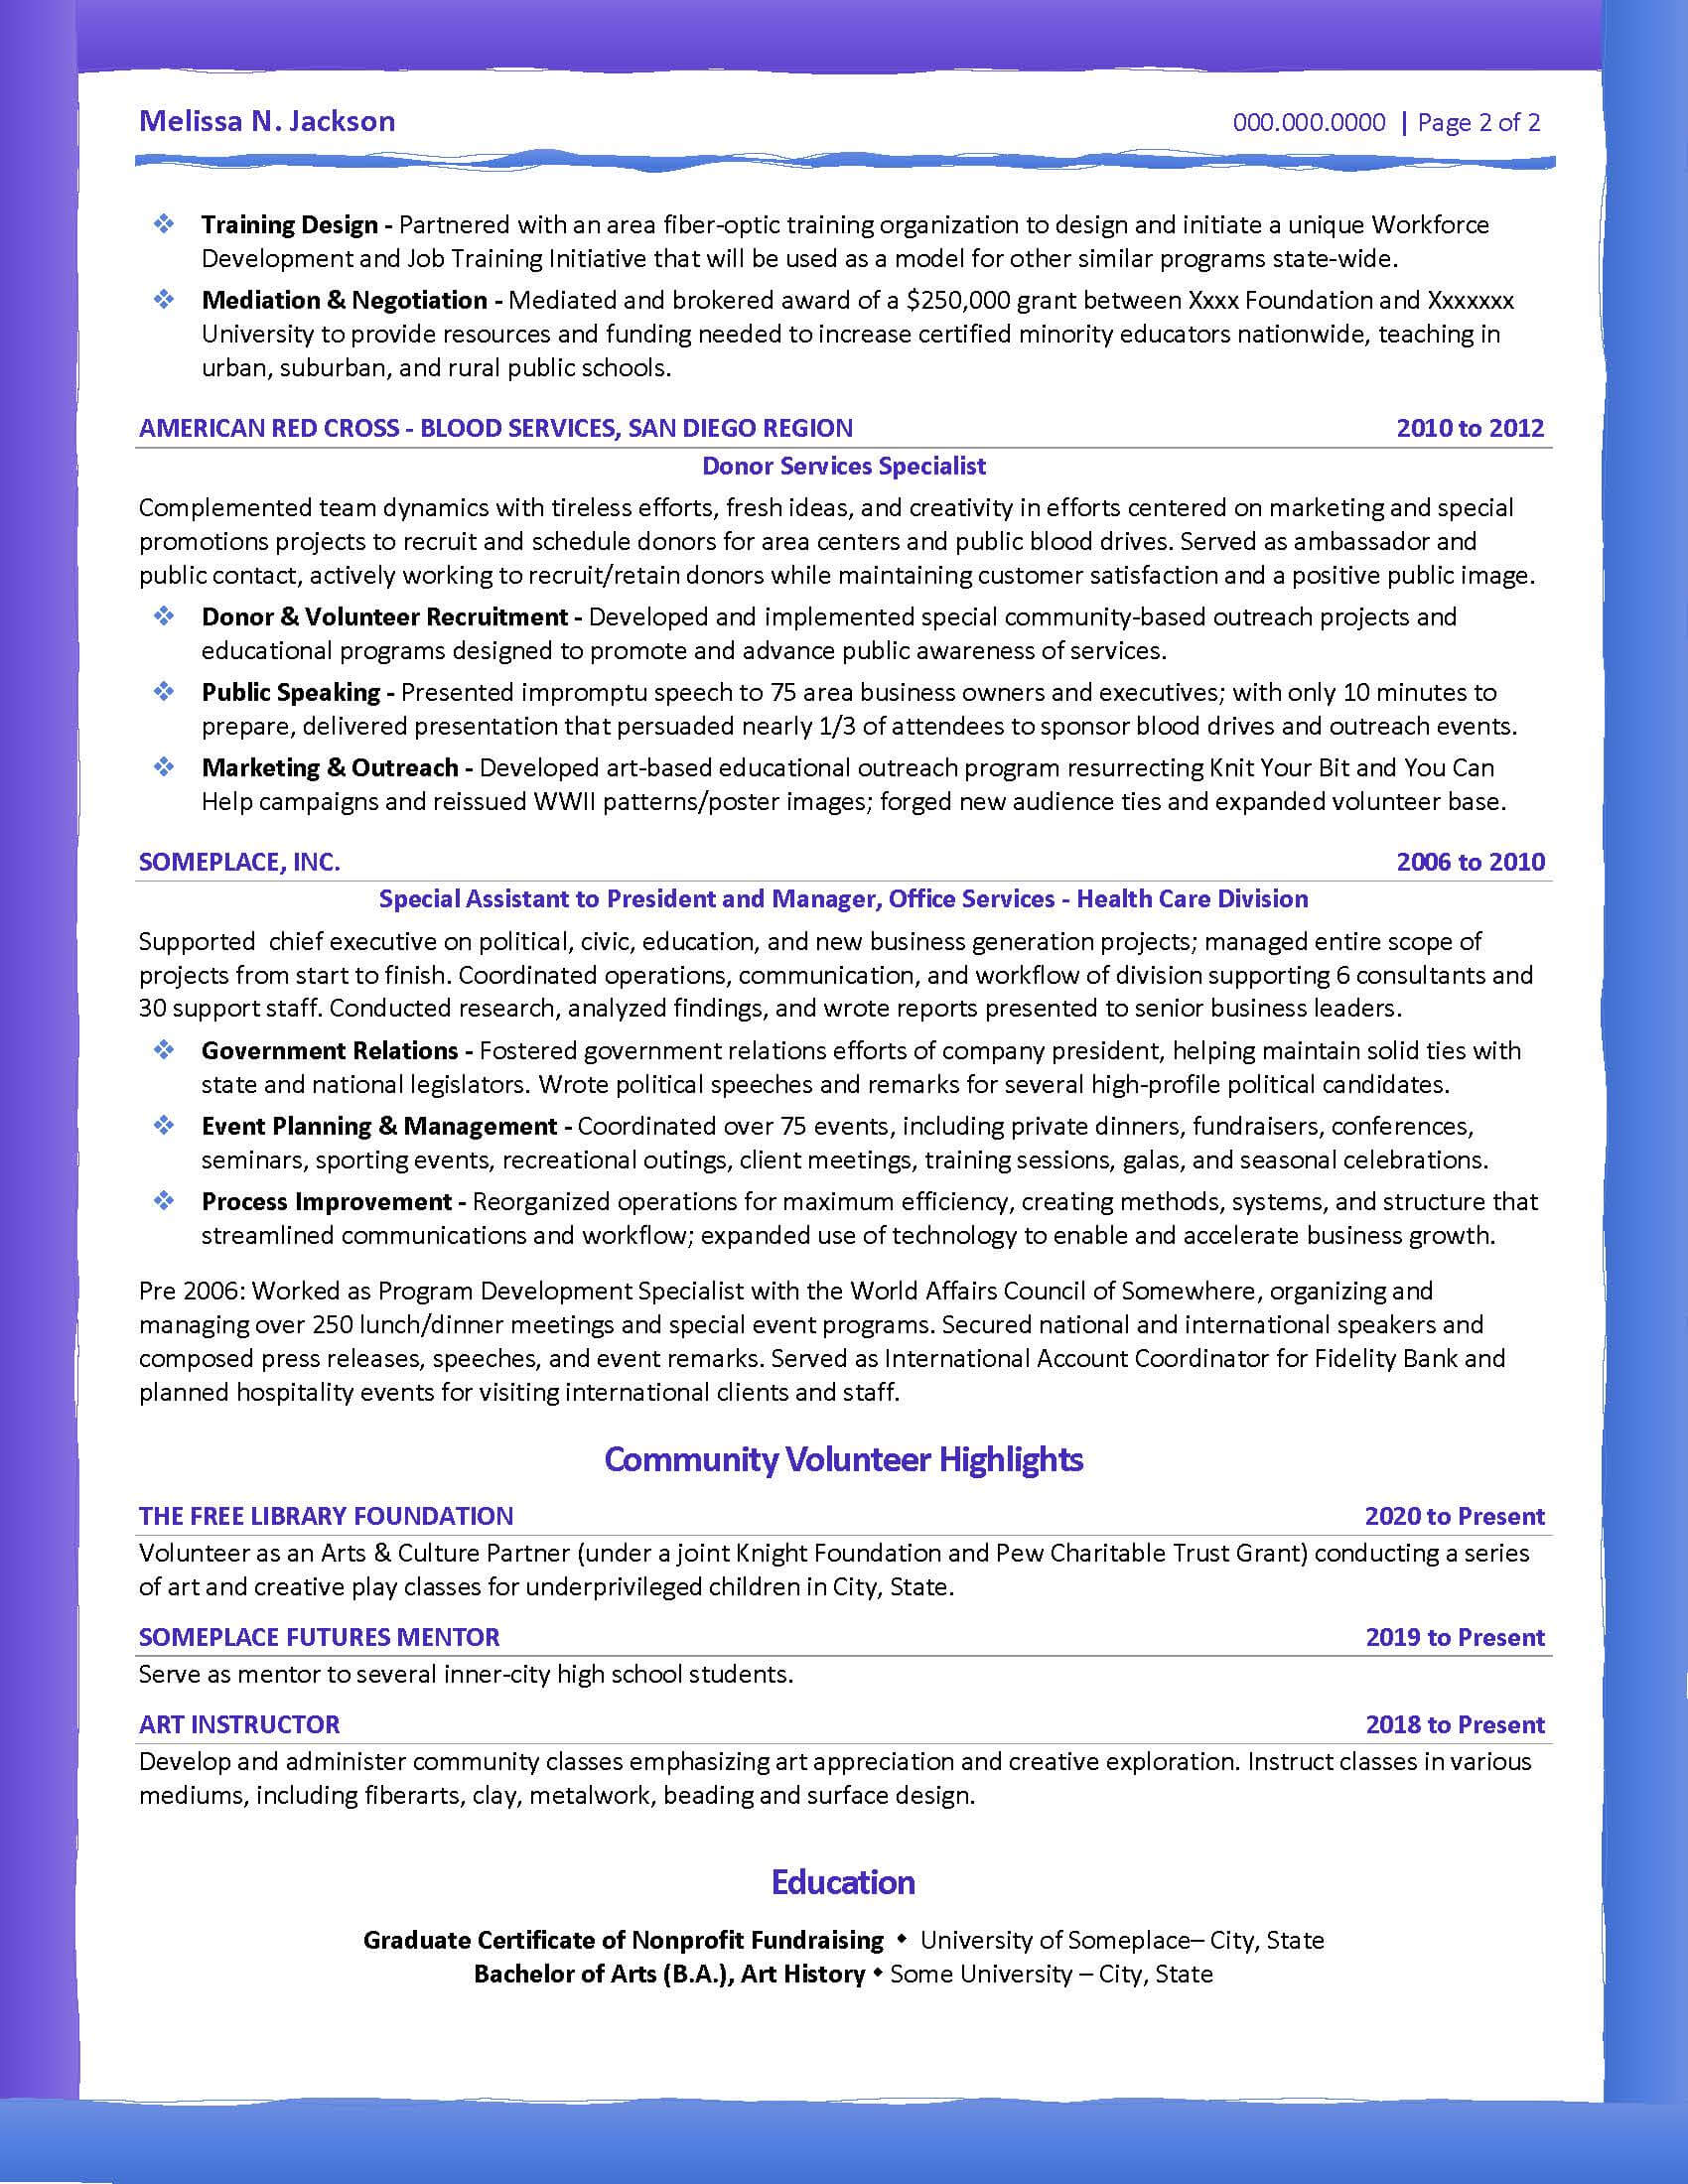 Example Resume with Volunteer Work Page 2